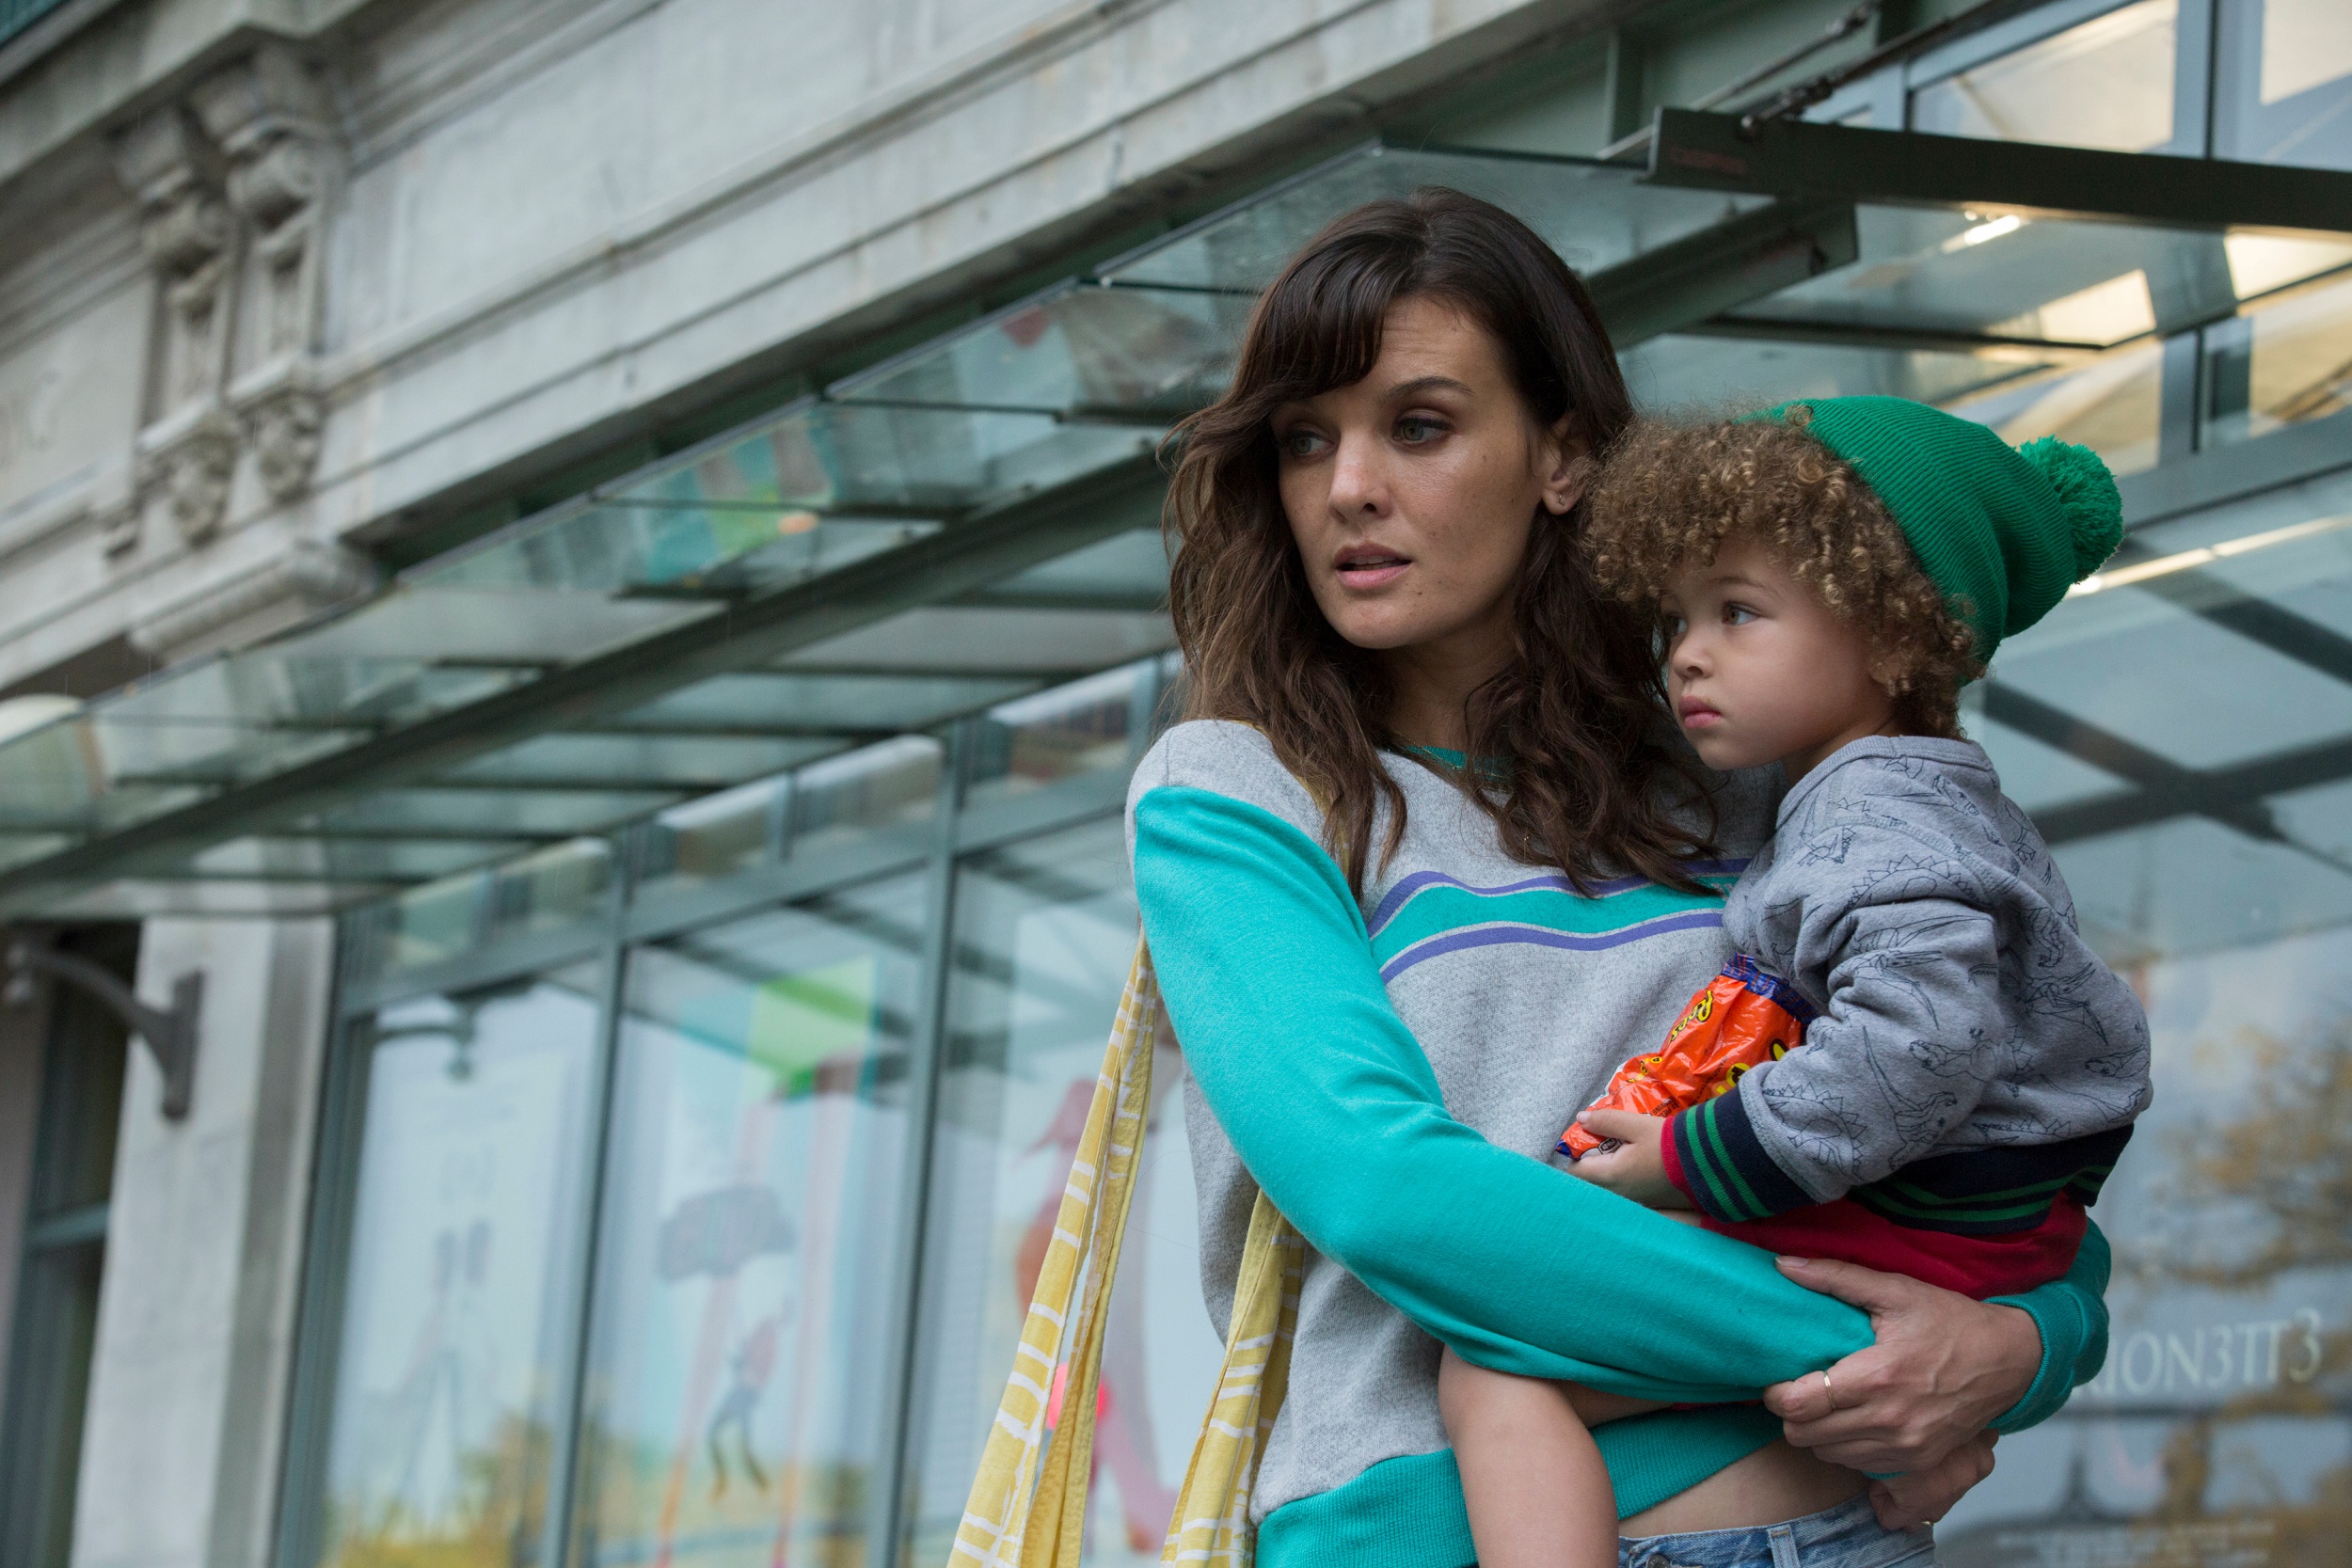 New Fox series takes on challenges of motherhood in social media age